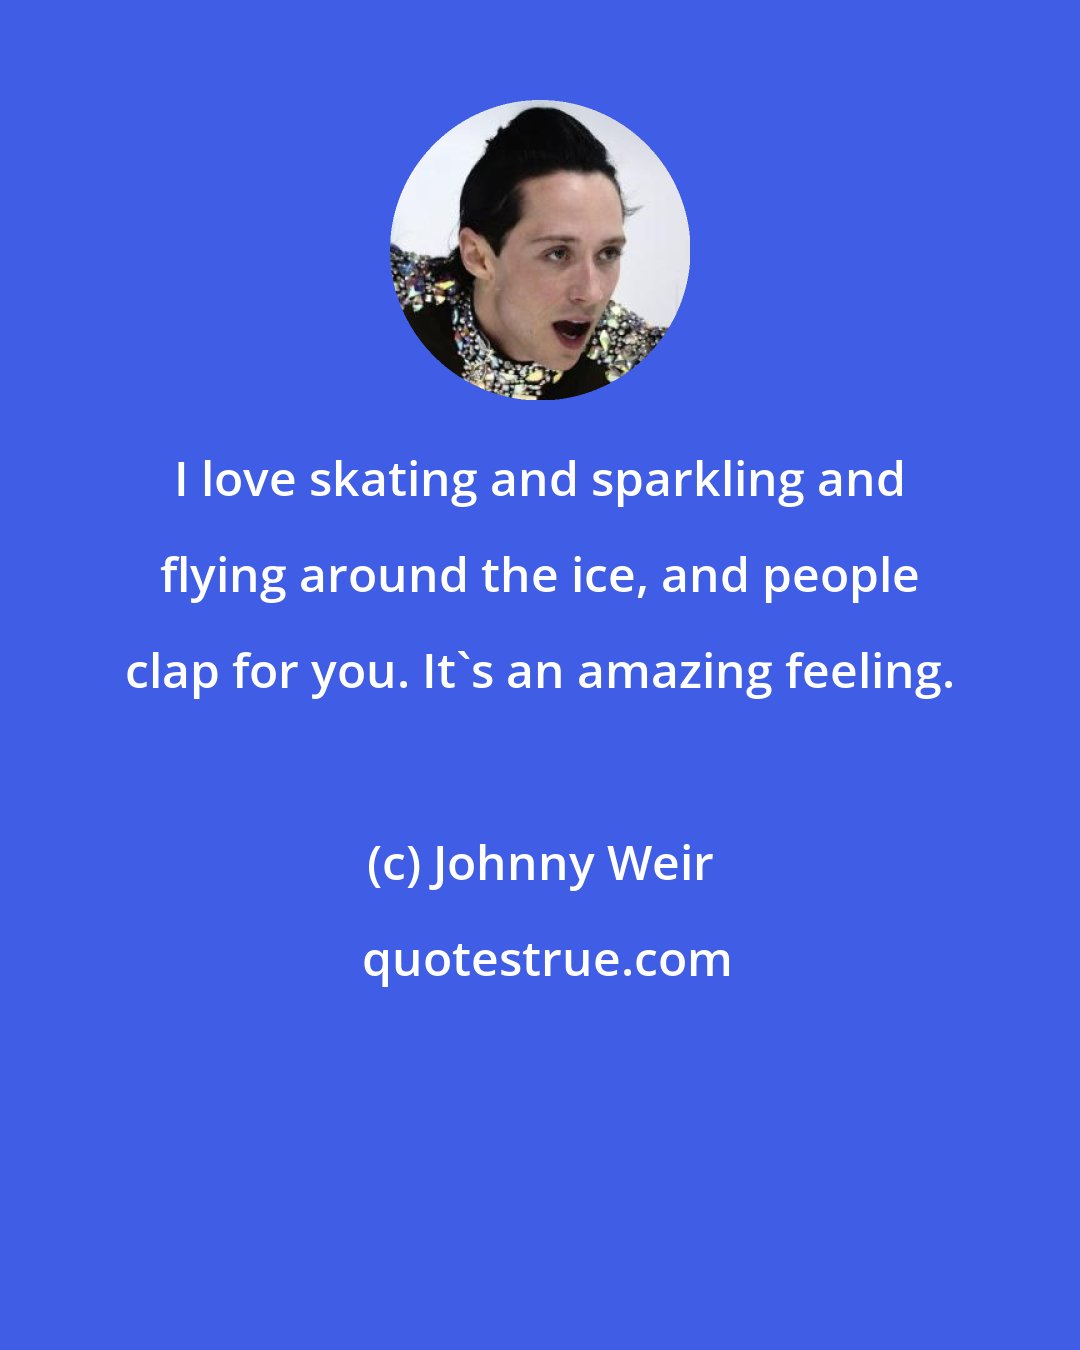 Johnny Weir: I love skating and sparkling and flying around the ice, and people clap for you. It's an amazing feeling.